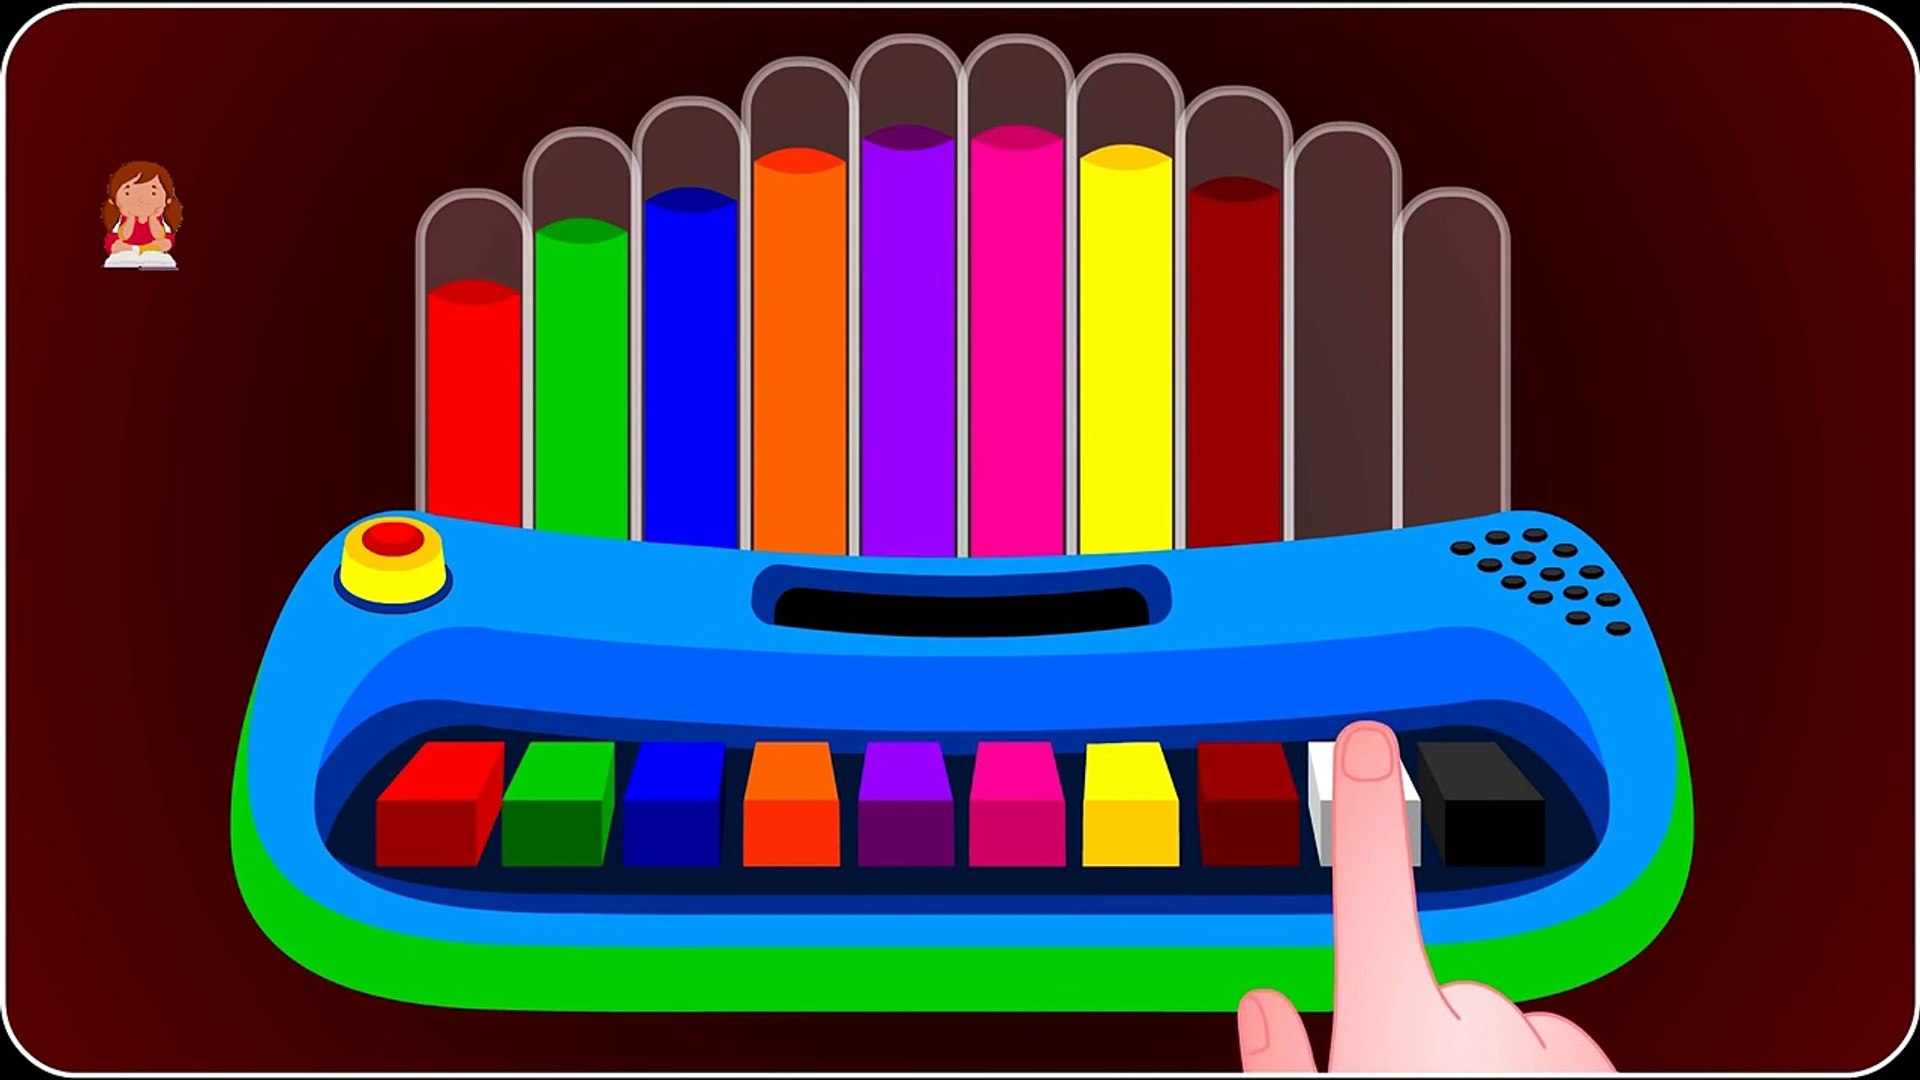 Learn Colors with Music Instrument for Children, Teach Colours, Baby Videos, Kids Learning Videos